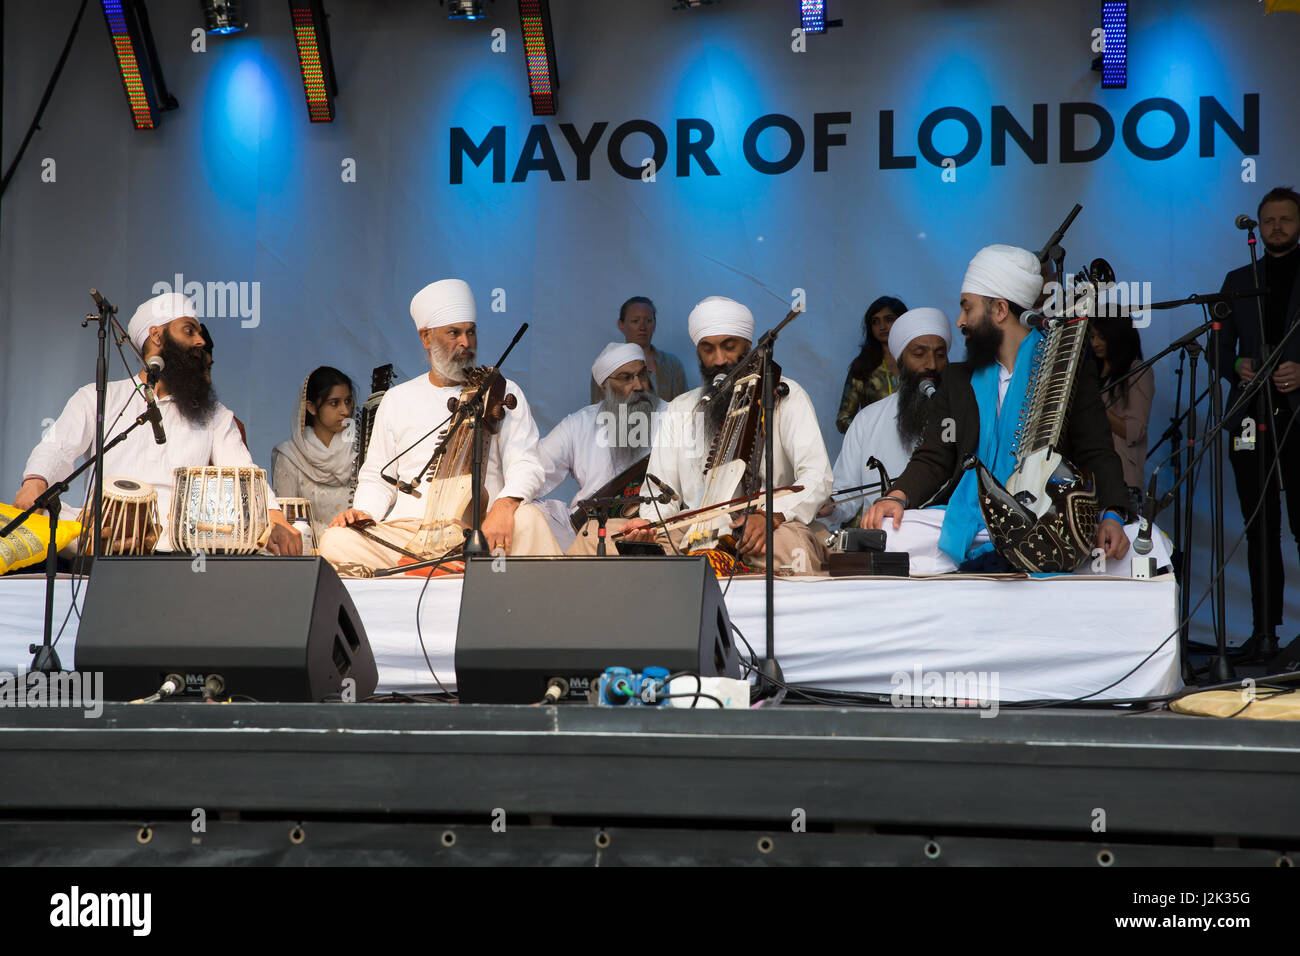 London, UK. 29th April, 2017. London Mayor Sadiq Khan brings Vaisakhi Celebration to Trafalgar Square in London this celebrates Sikh culture and heritage. There were food stalls, music and dancers on stage, children's activities and Sikh artists. It returns to the square after two years of being held at City Hall Credit: Keith Larby/Alamy Live News Stock Photo